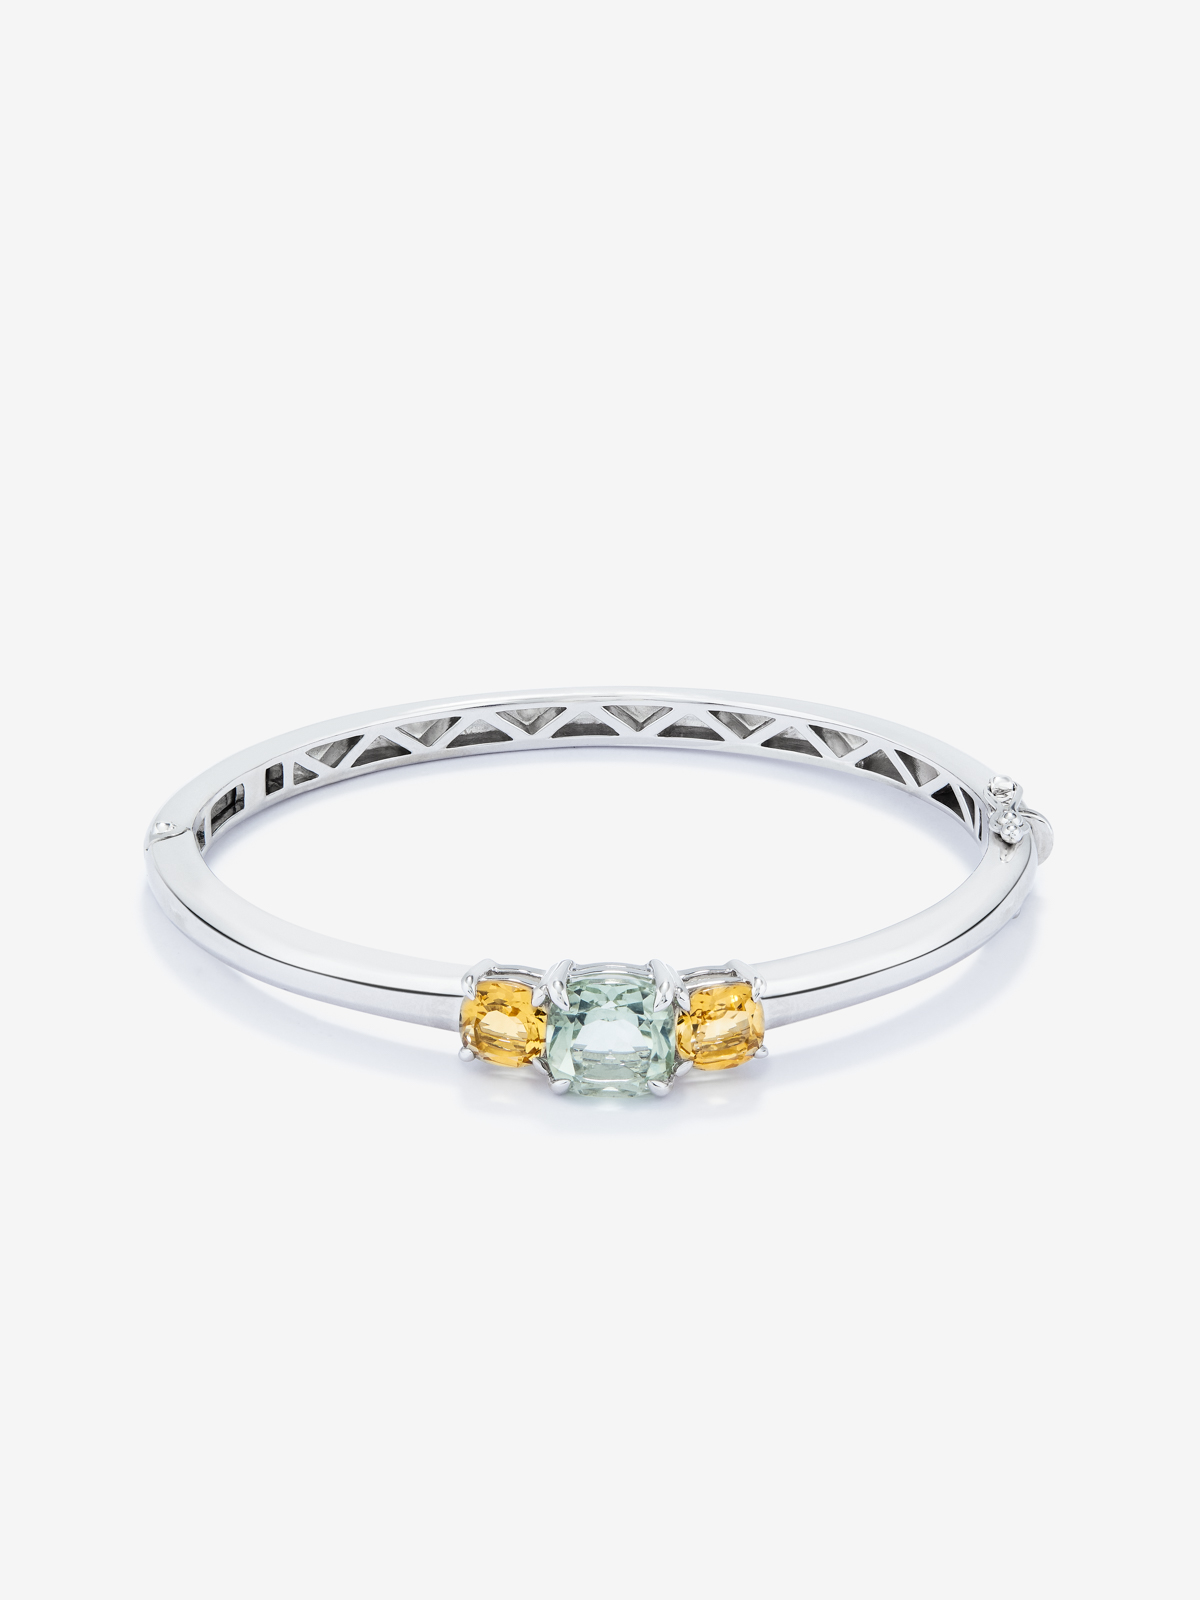 Silver bracelet with green amethyst and yellow citrines